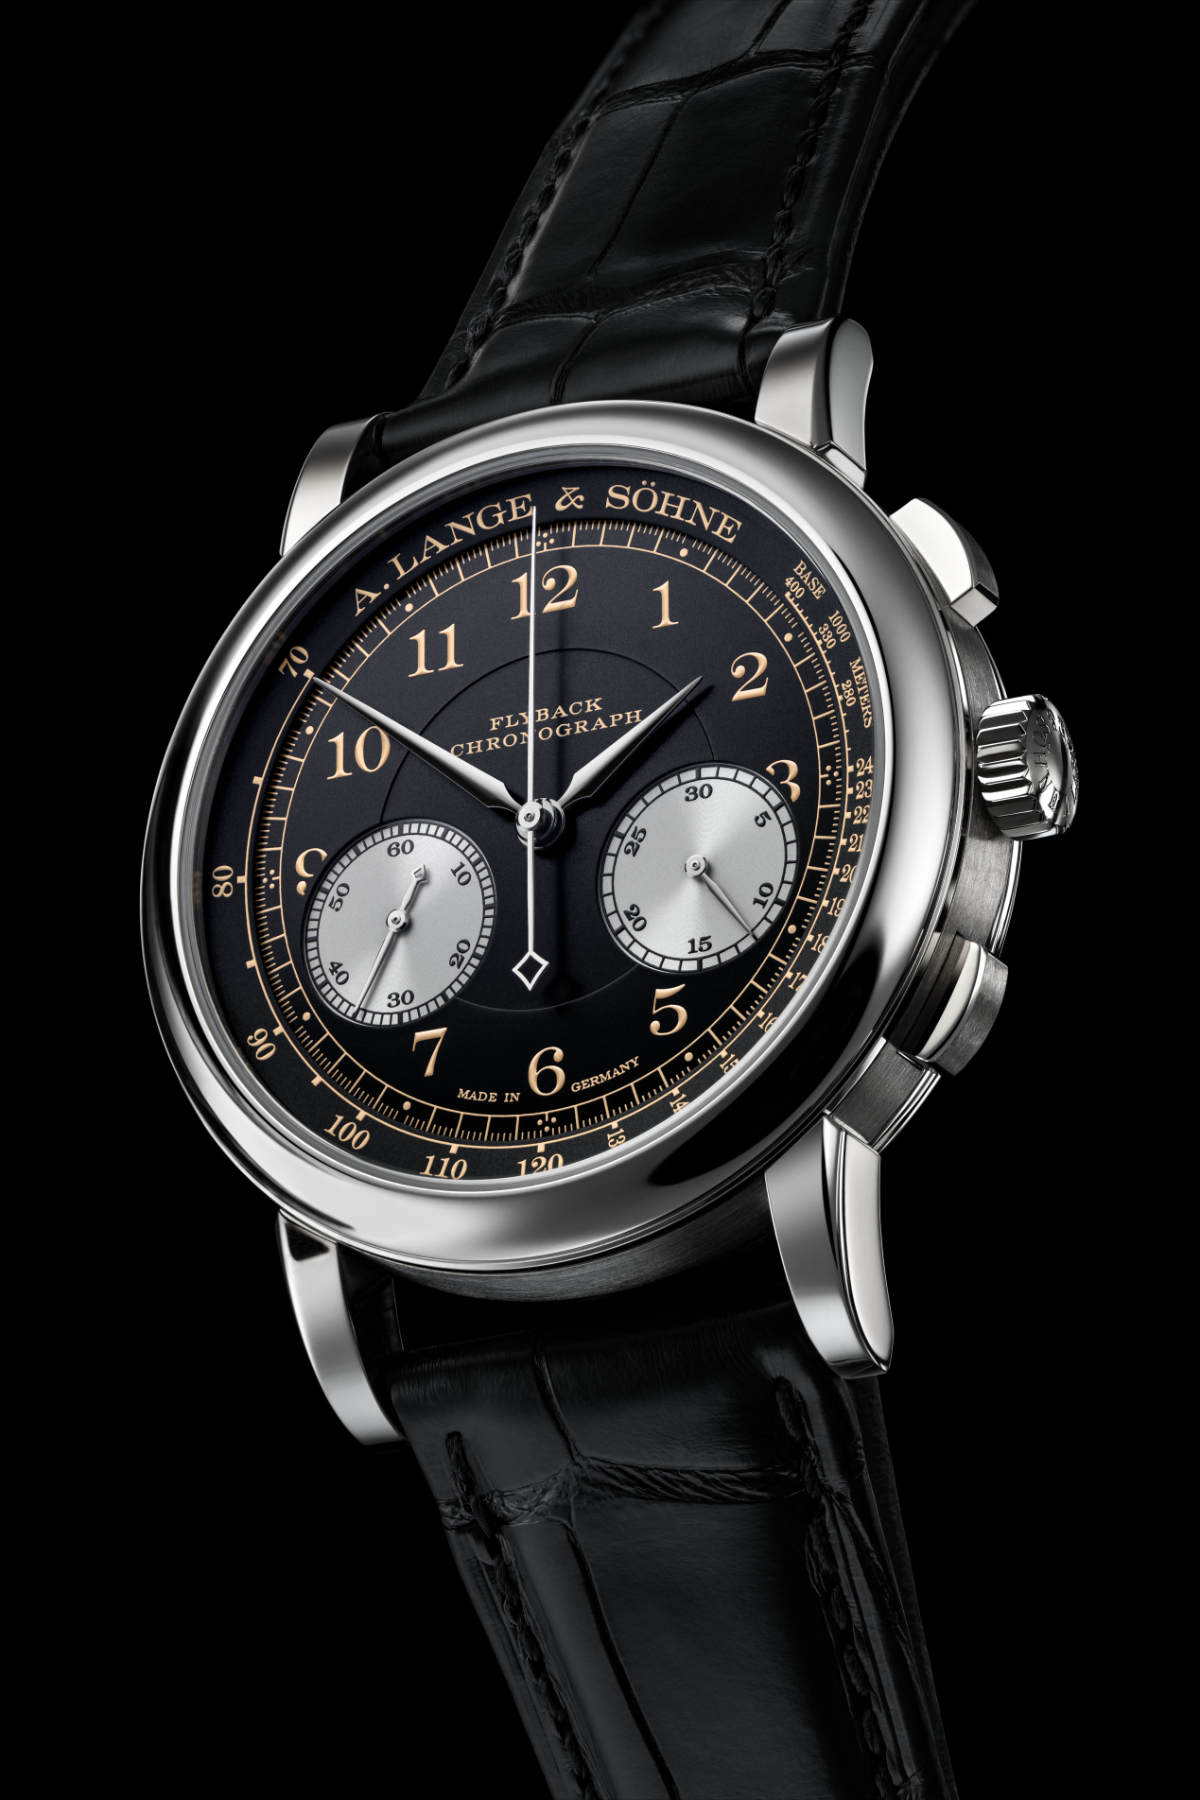 1815 CHRONOGRAPH “Hampton Court Edition”: Watchmaking Artistry For A Good Cause